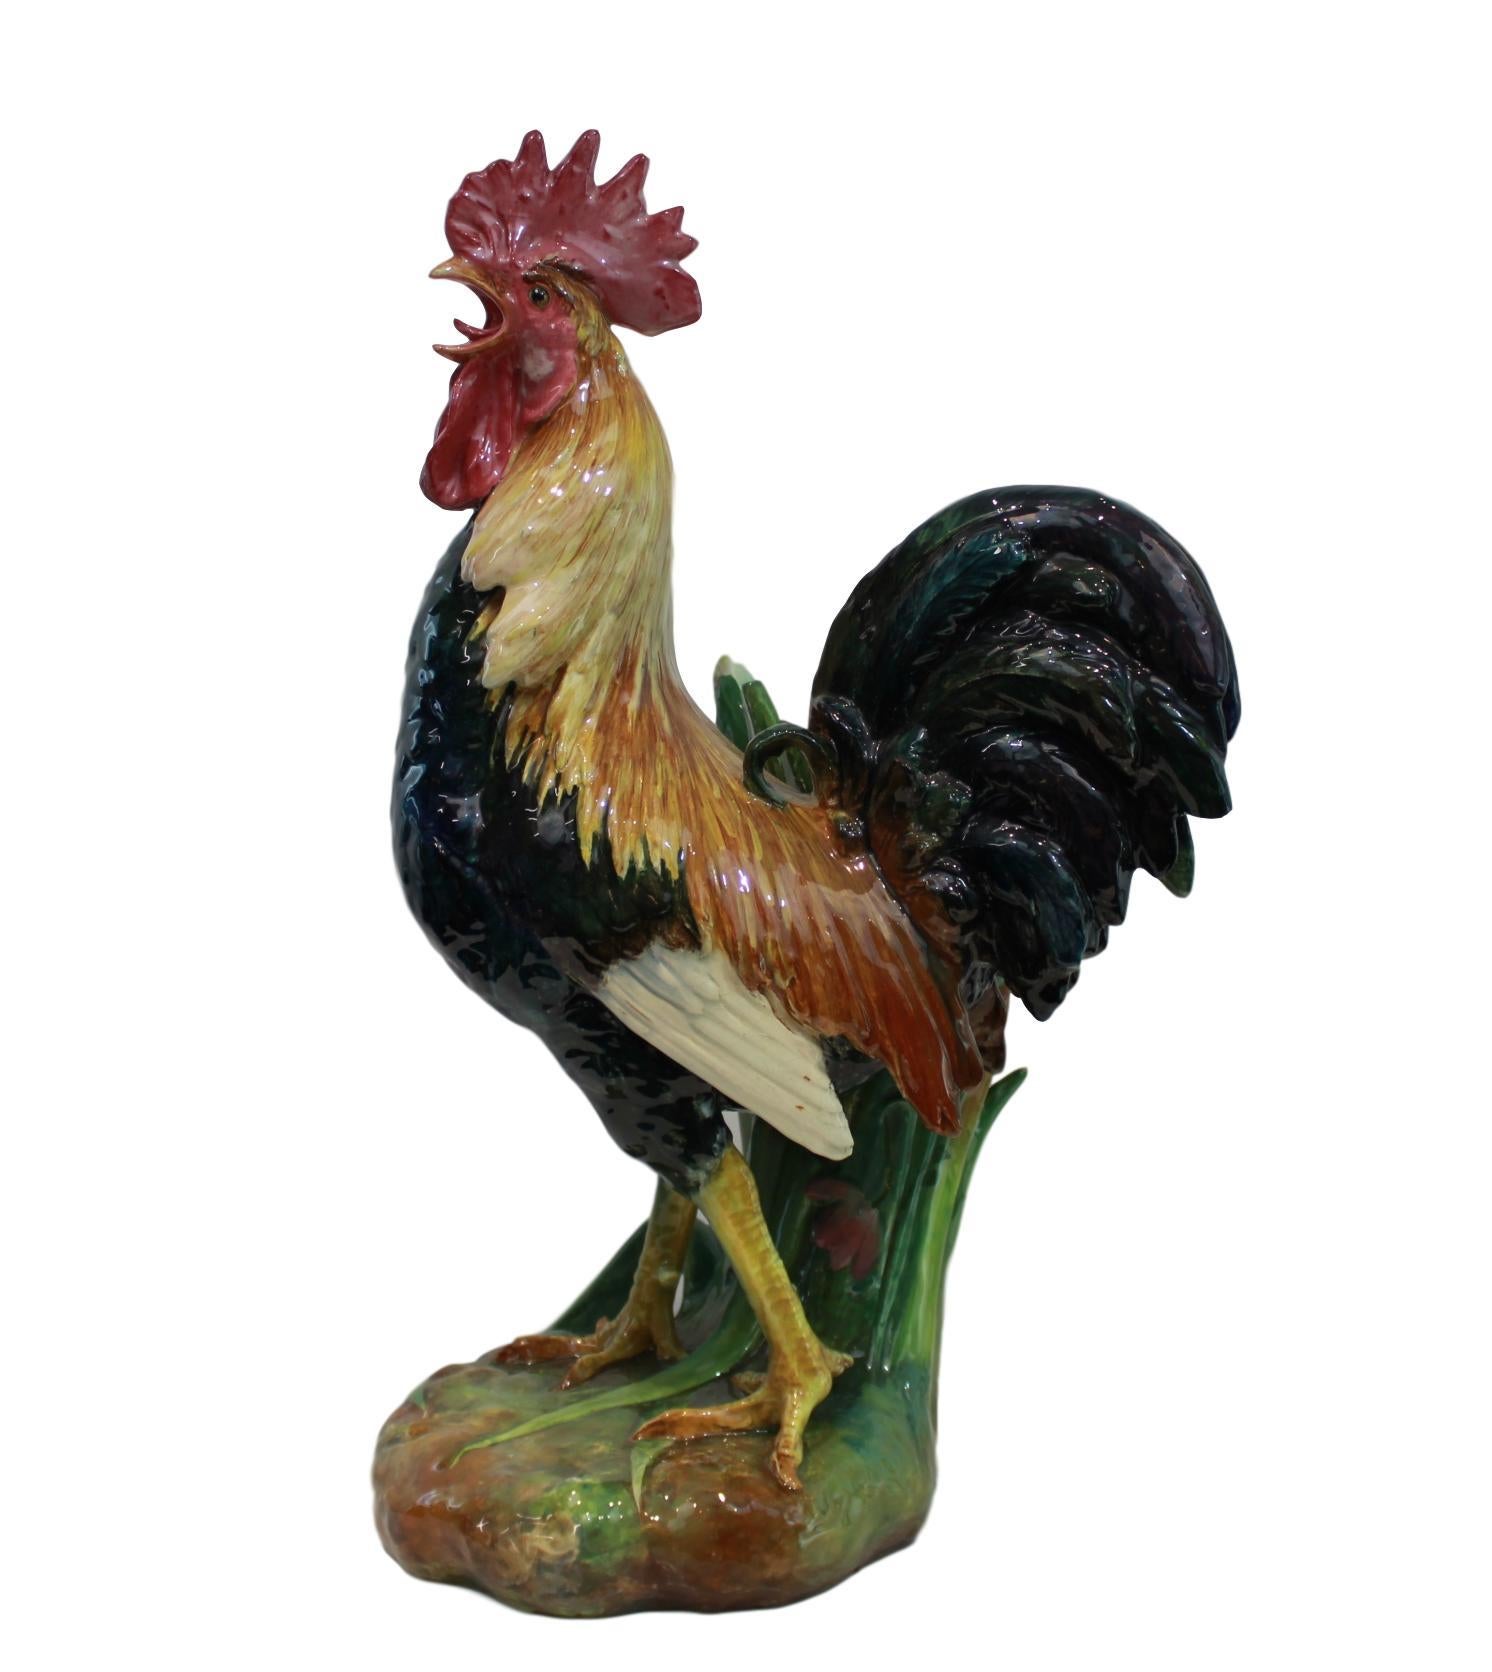 Molded Very Large Majolica Rooster Vase by Jerome Massier, French, circa 1880